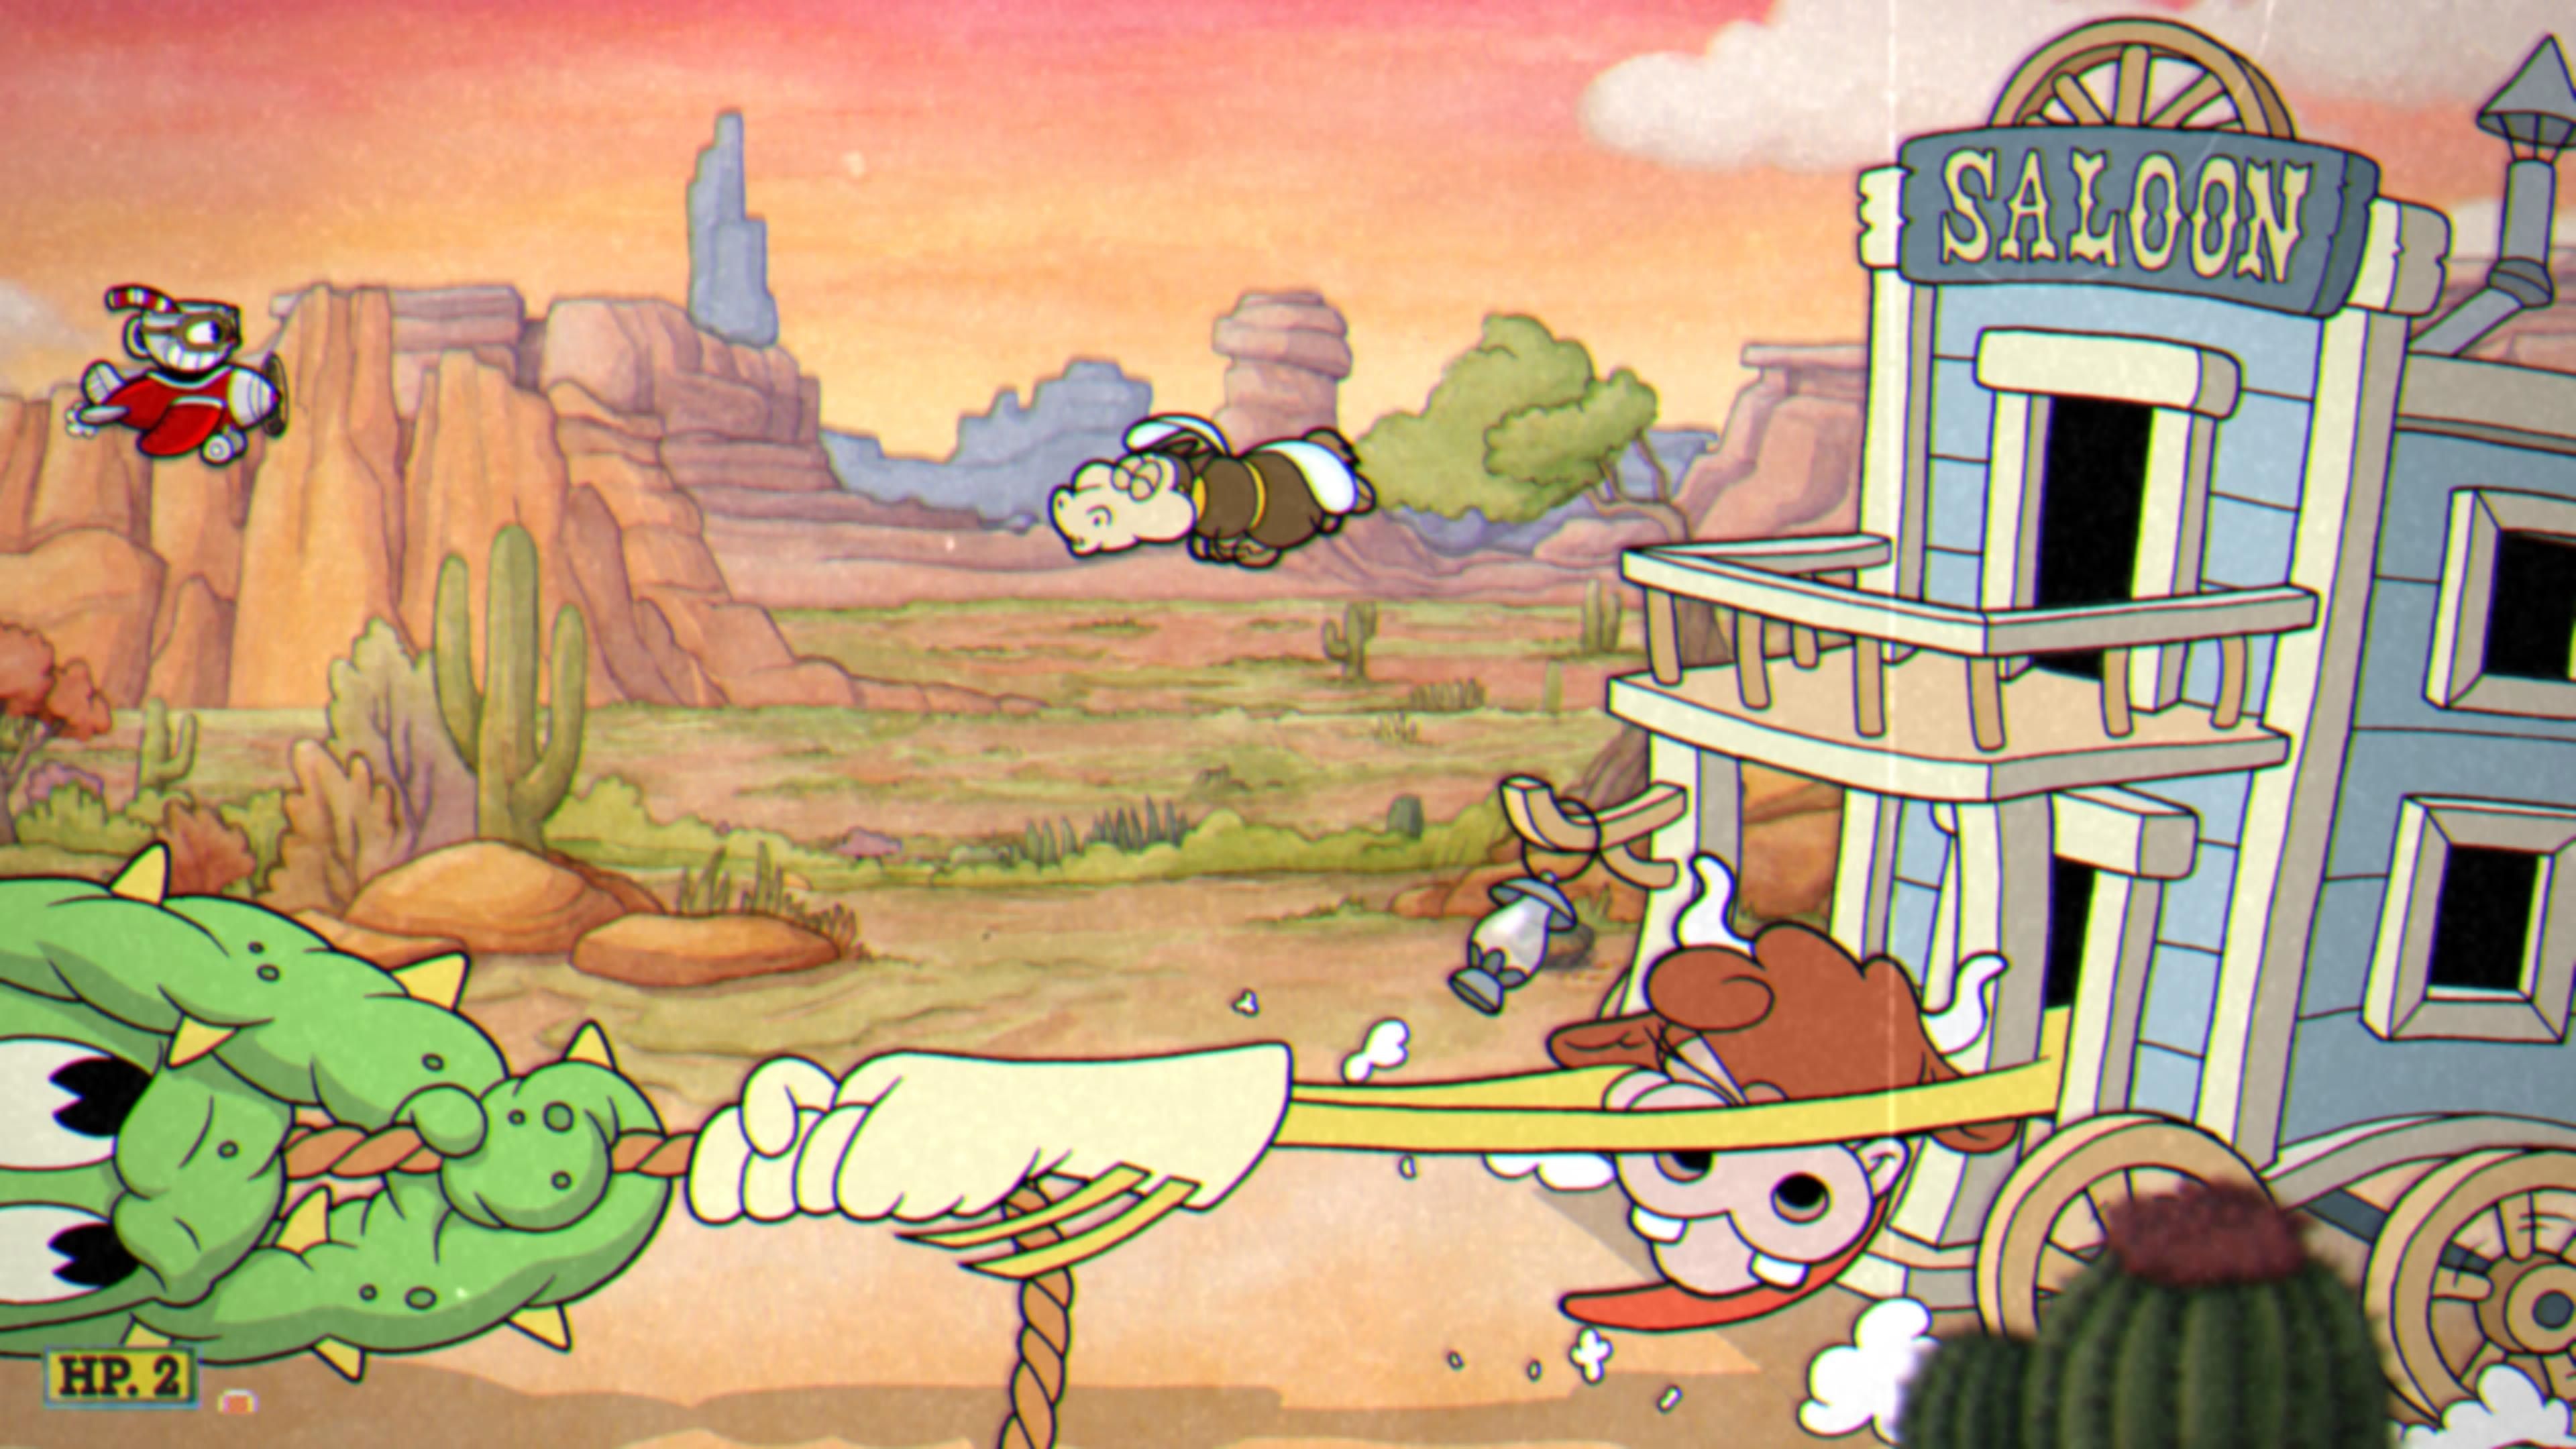 Cuphead The Delicious Course, Esther Winchester, Phase 1, Grabbing a cactus